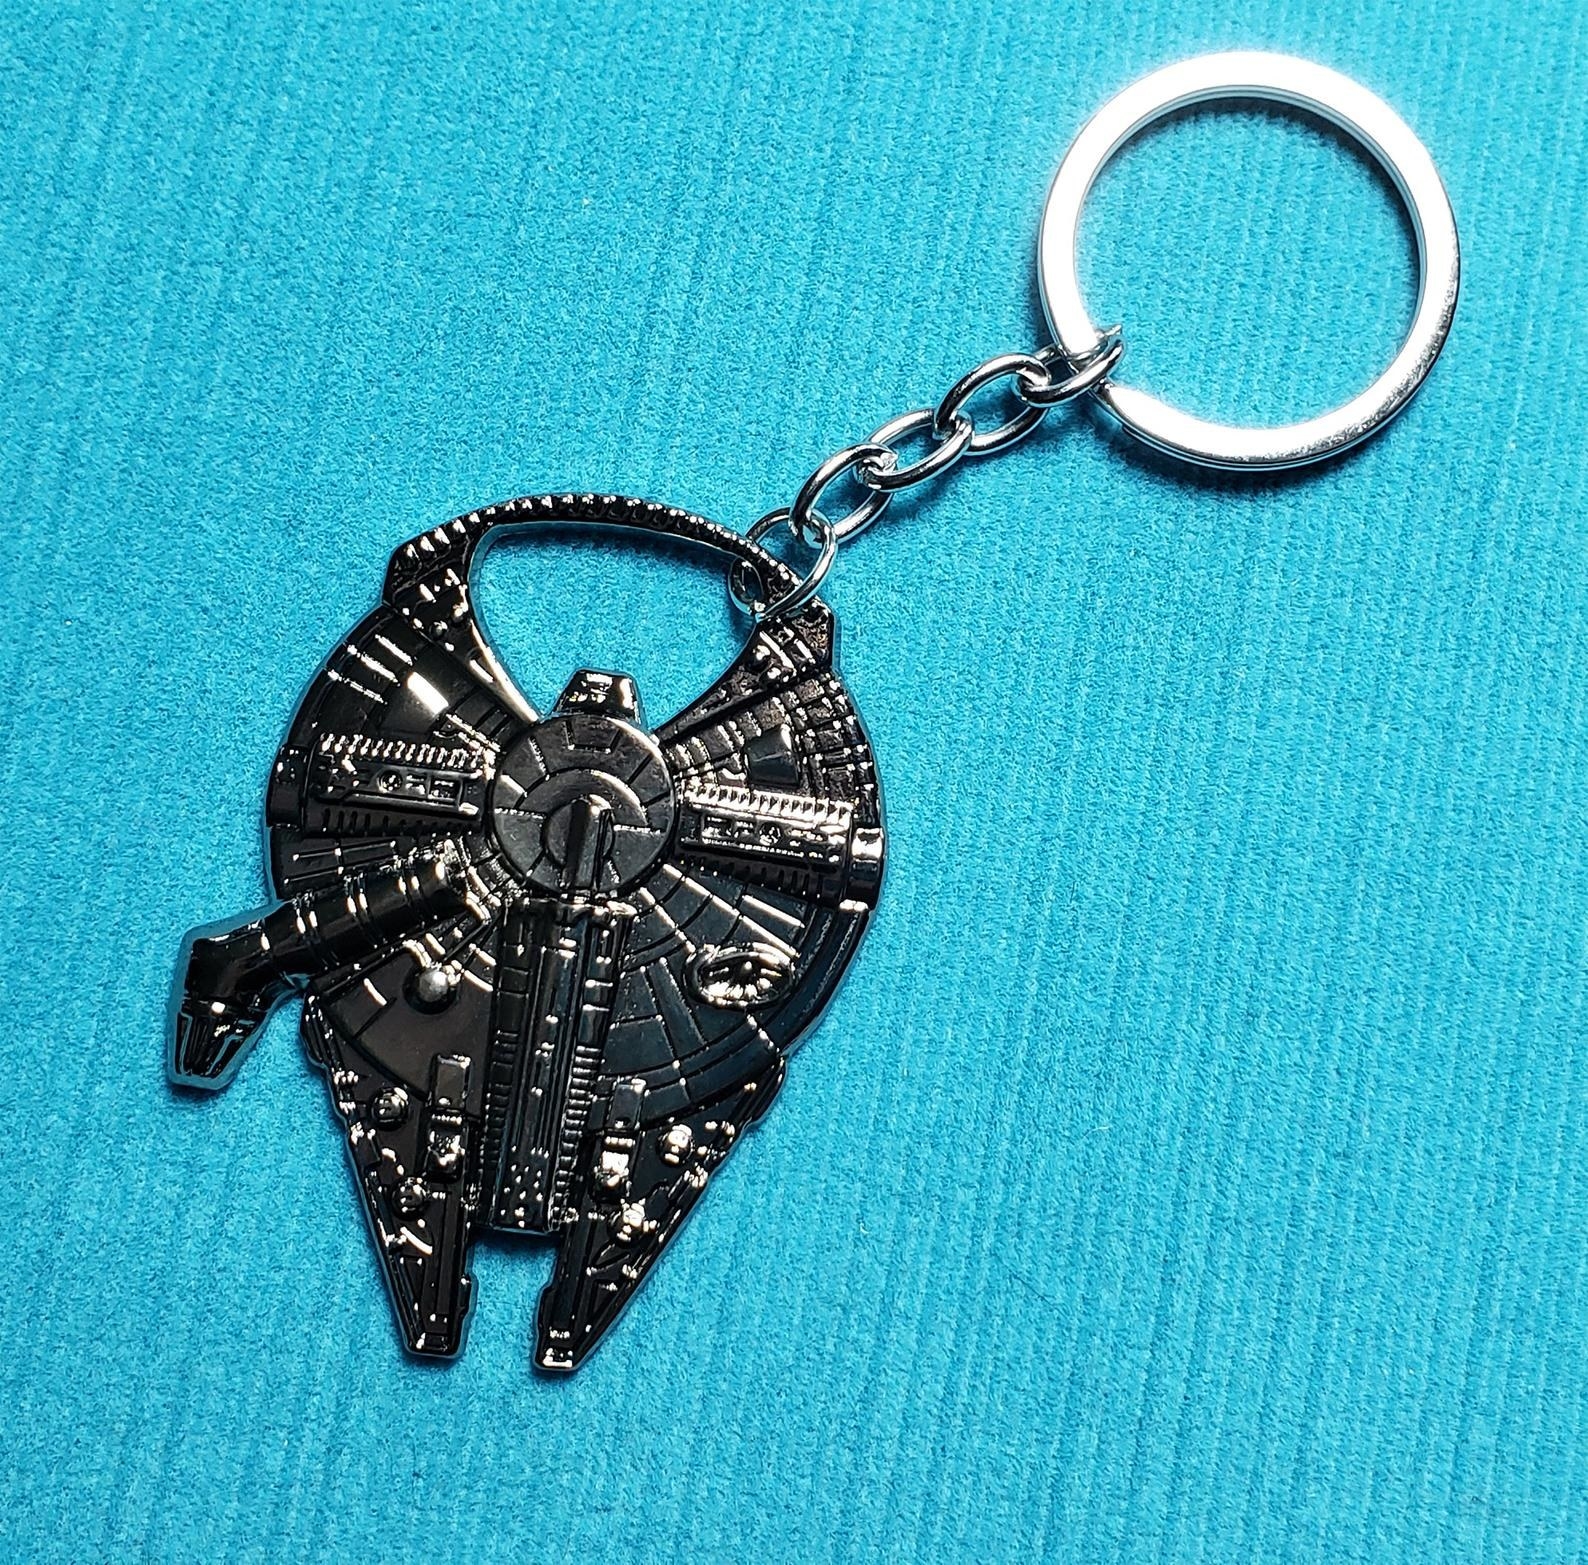 the keychain shaped like the Millenium Falcon of course